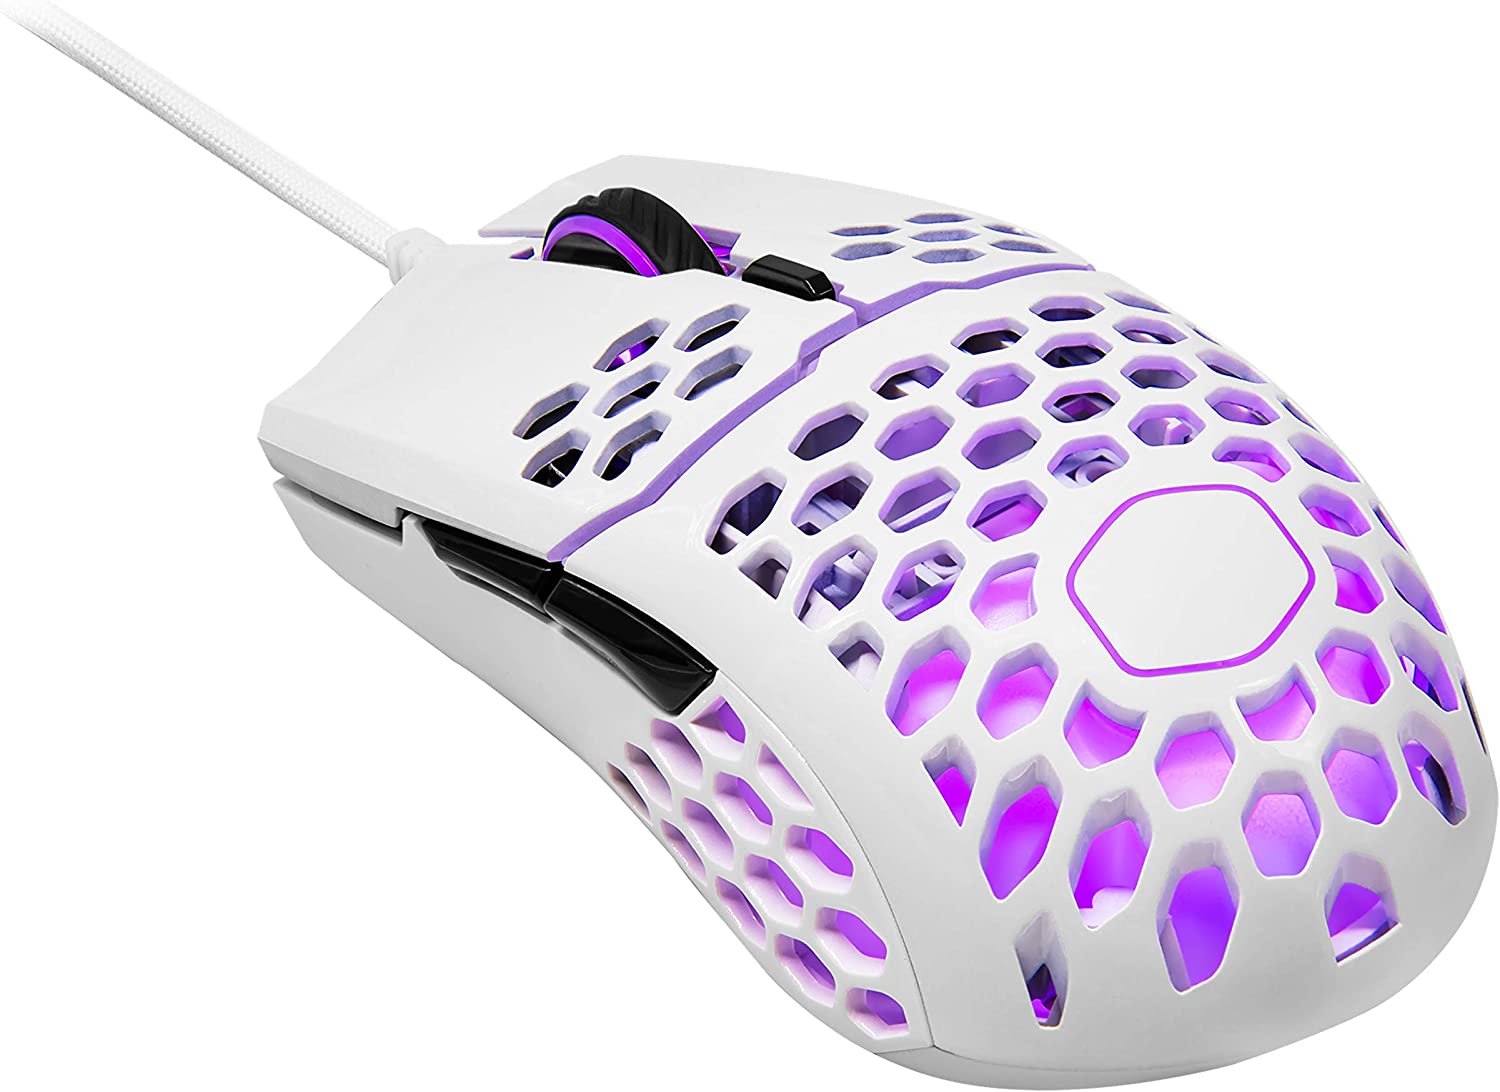 Cooler Master MM711 Matte White RGB 60G with Lightweight 16,000 DPI Gaming  Mouse